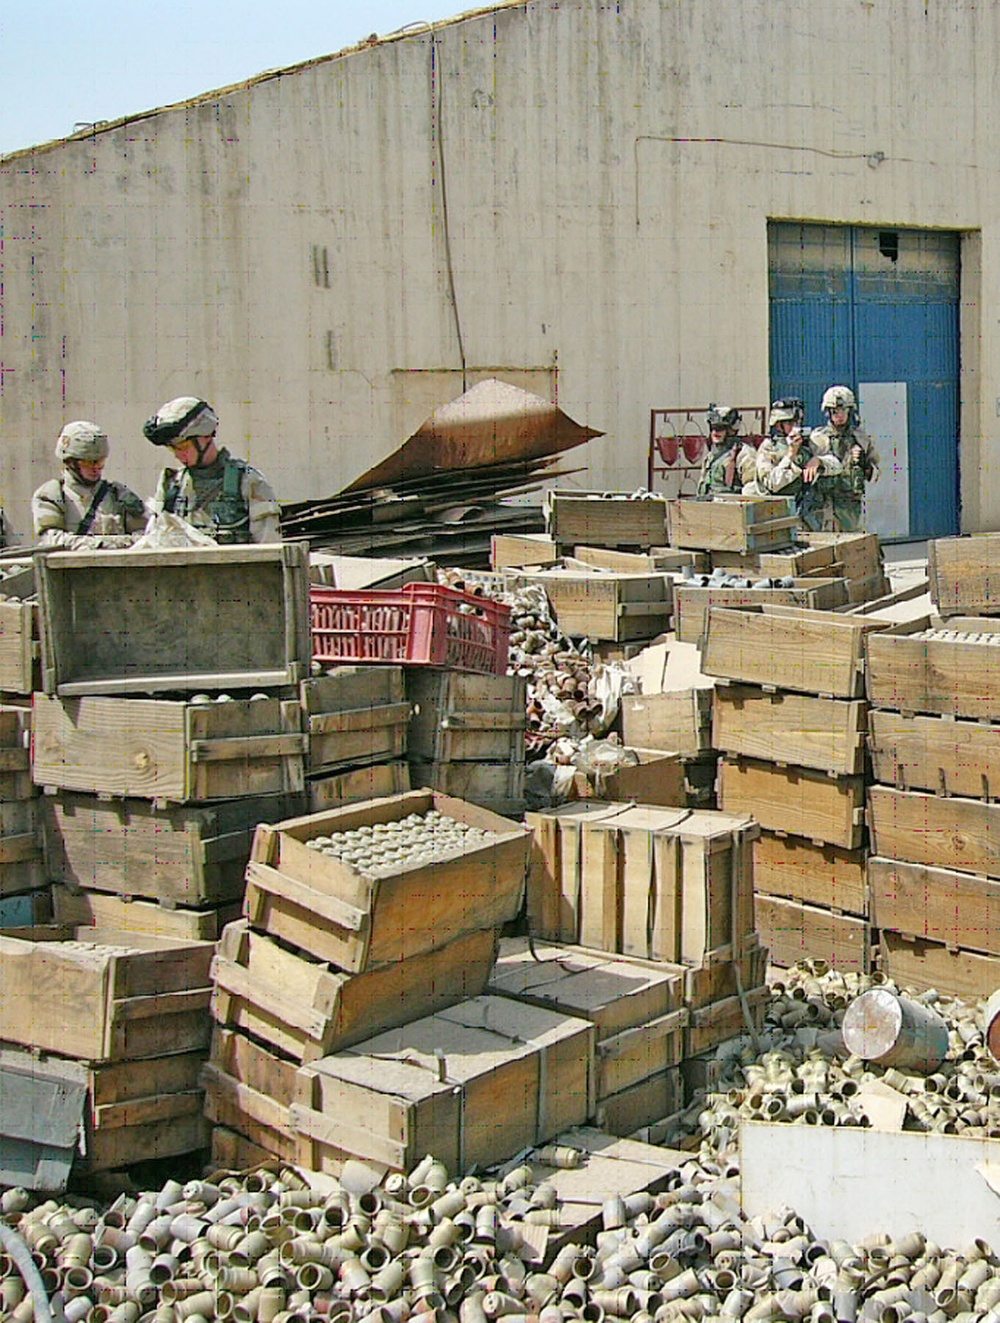 Soldiers inspect crates filled with sub-munitions and fuzes